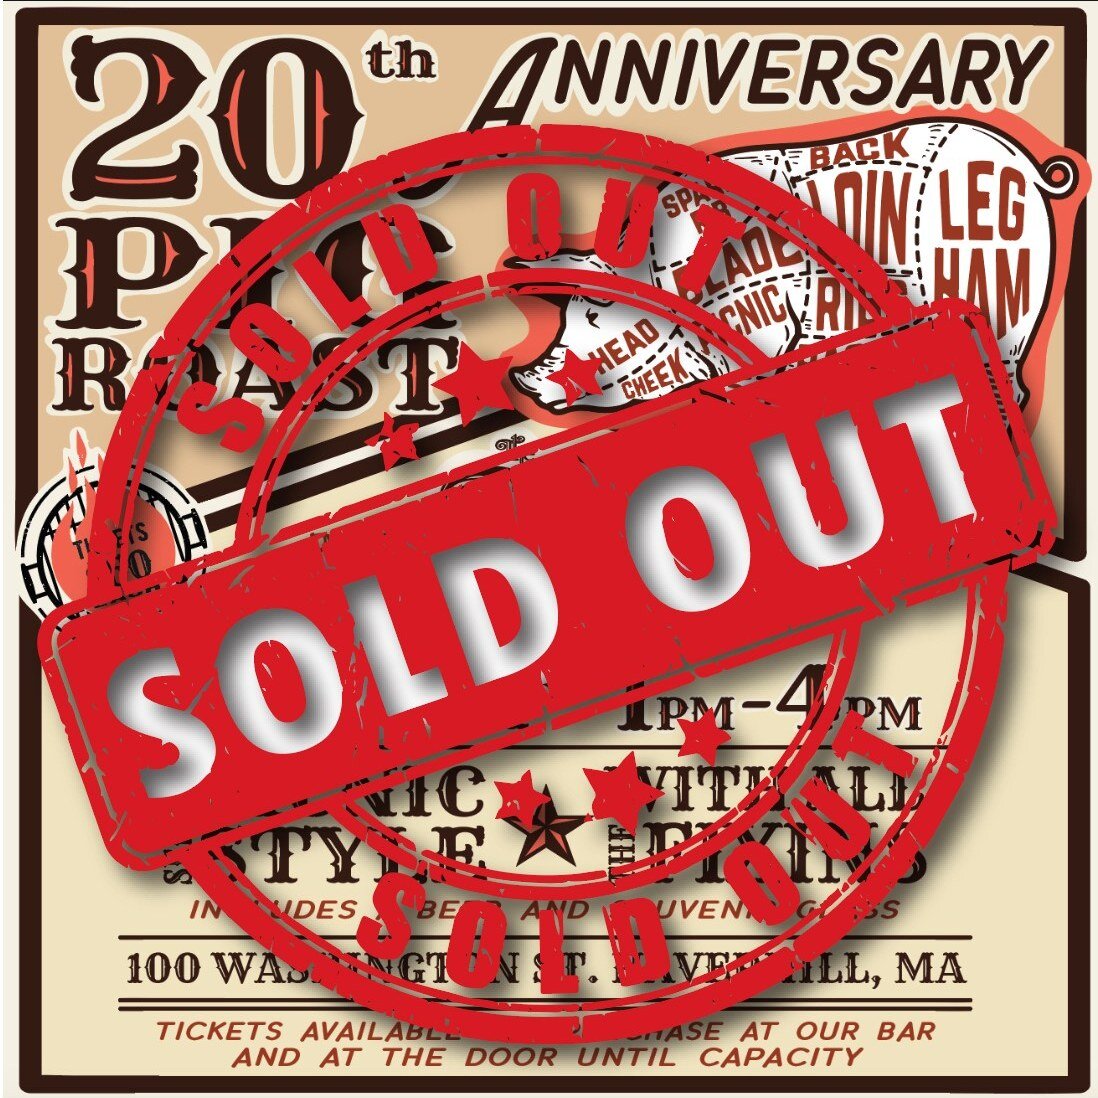 Wow! It&rsquo;s official, our 20th Anniversary Pig Roast is SOLD OUT! Thank you to everyone who purchased tickets, can't wait to see you there!

#soldout #20thbirthday #20thanniversary #since2003 #beerisbornhere #youreinvited #pigroast #birthdayparty